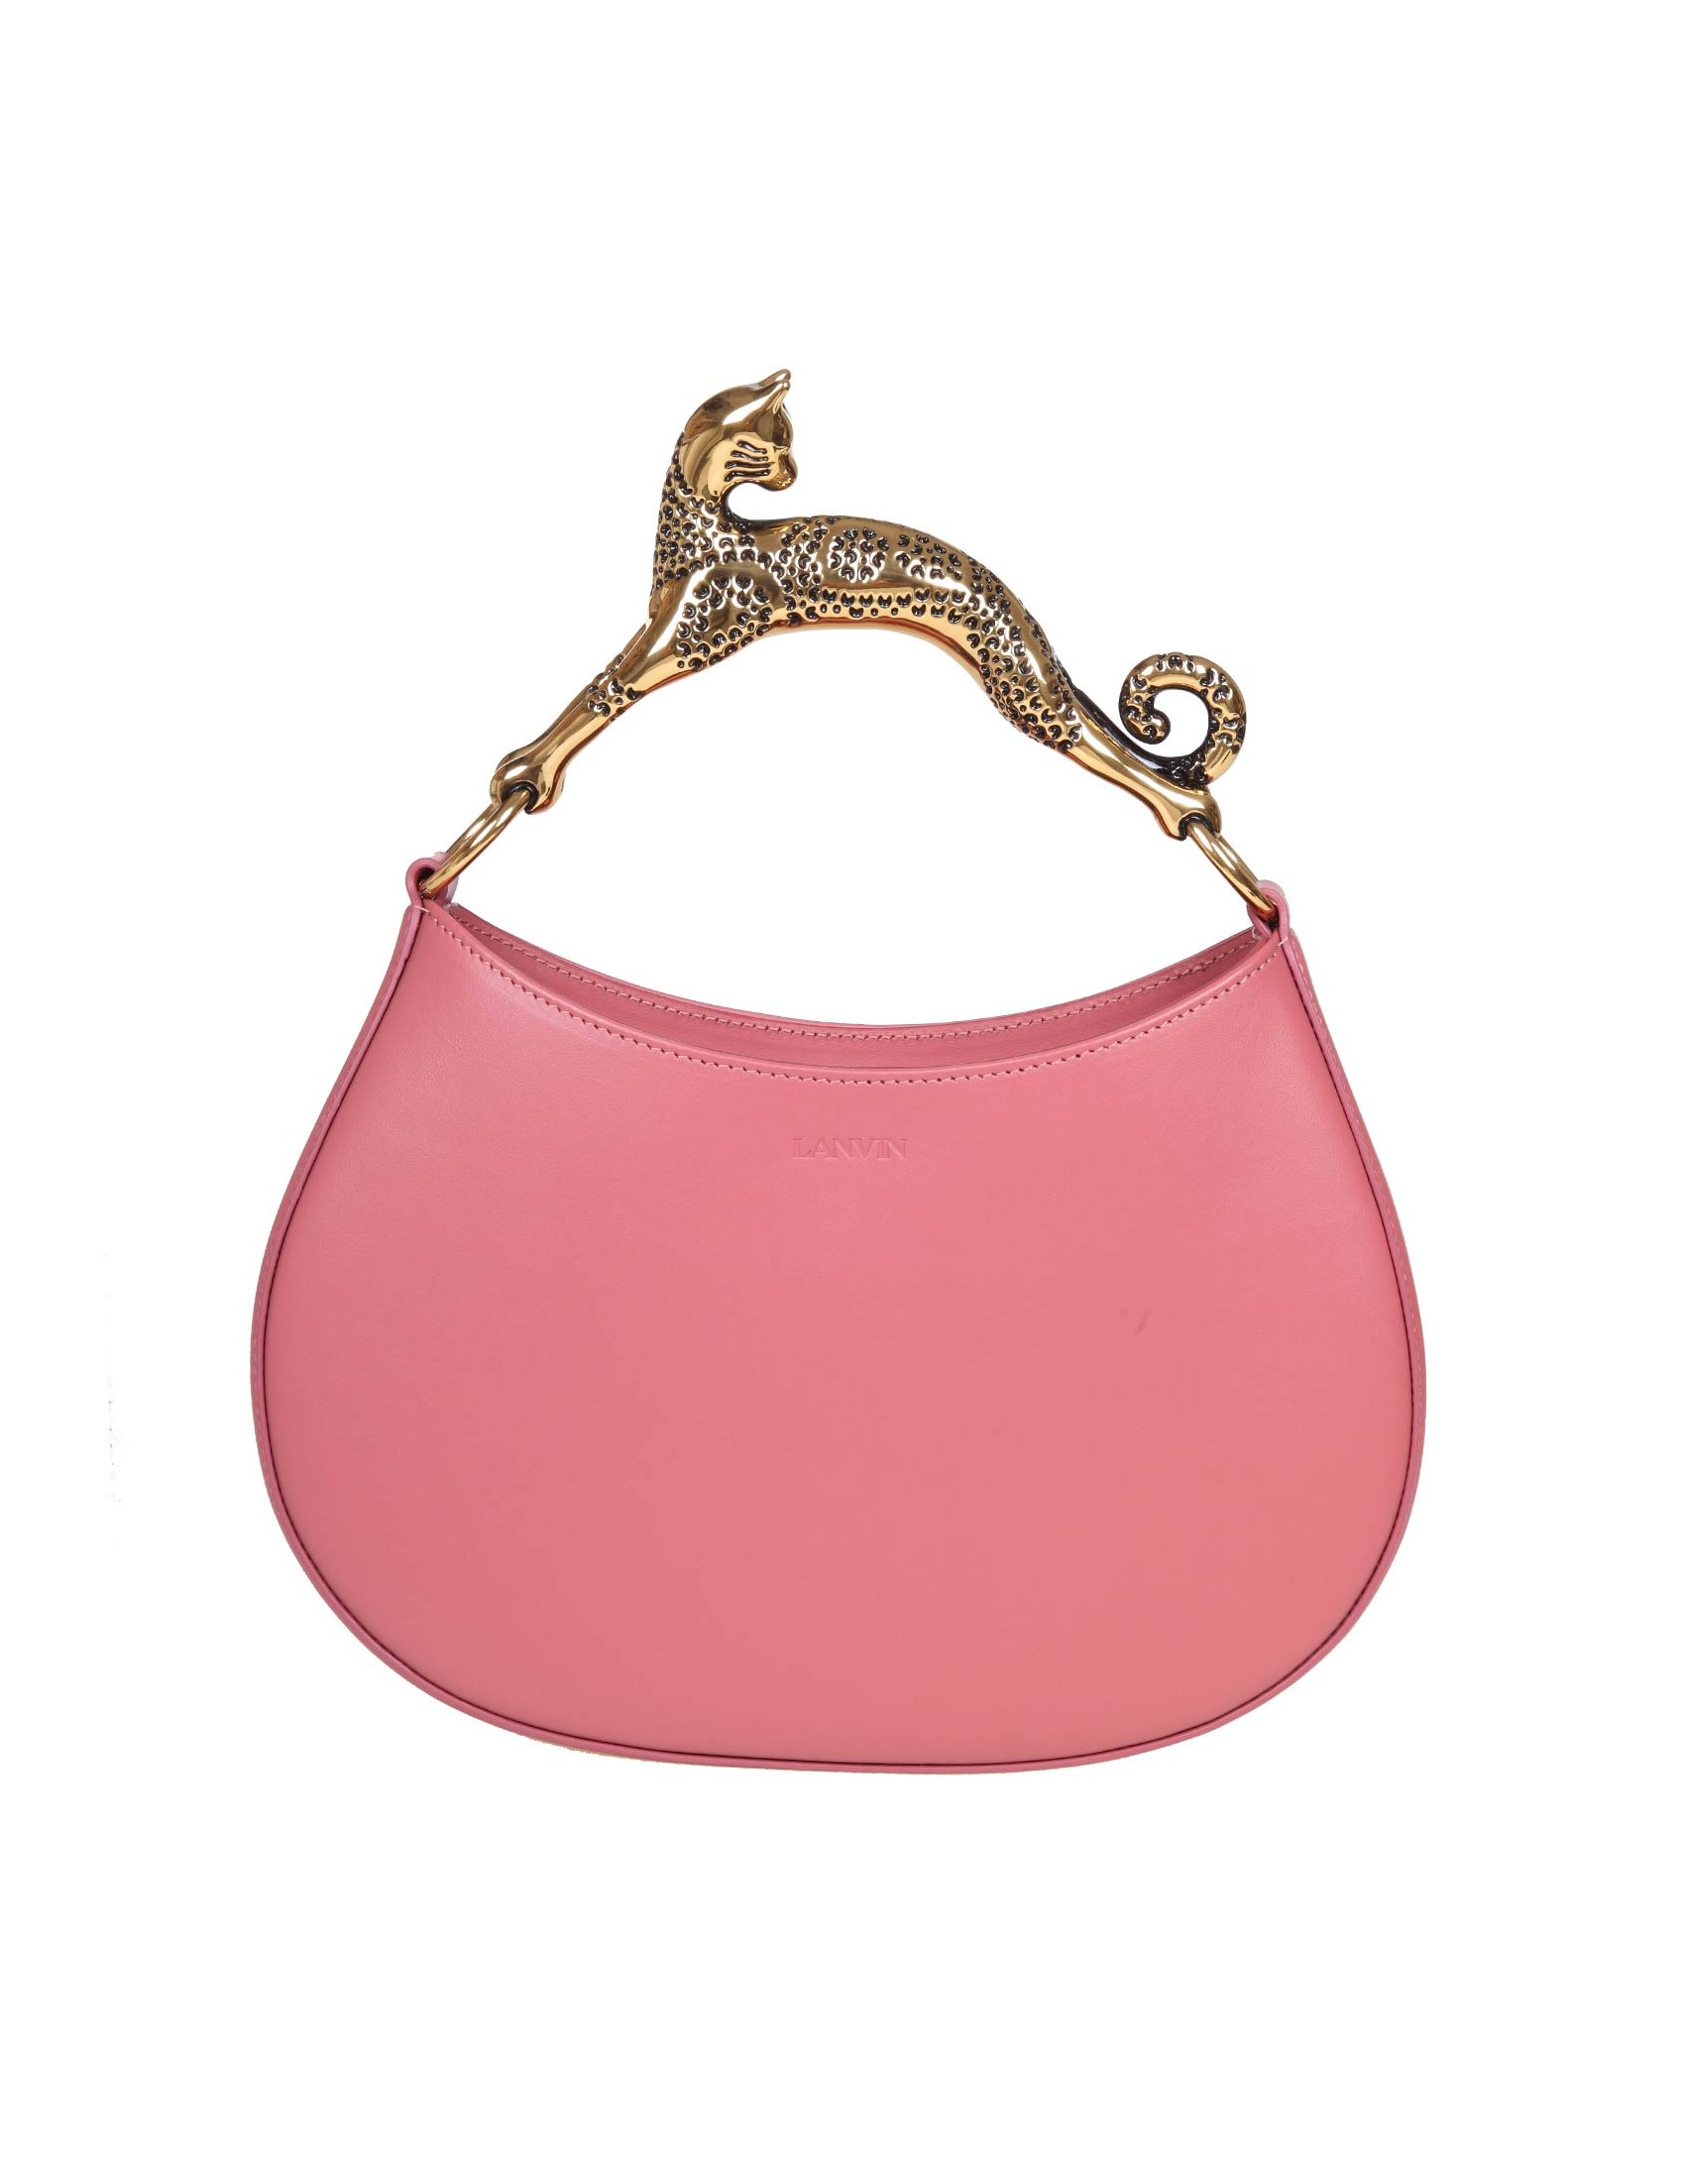 LANVIN HOBO CAT BAG IN PINK LEATHER